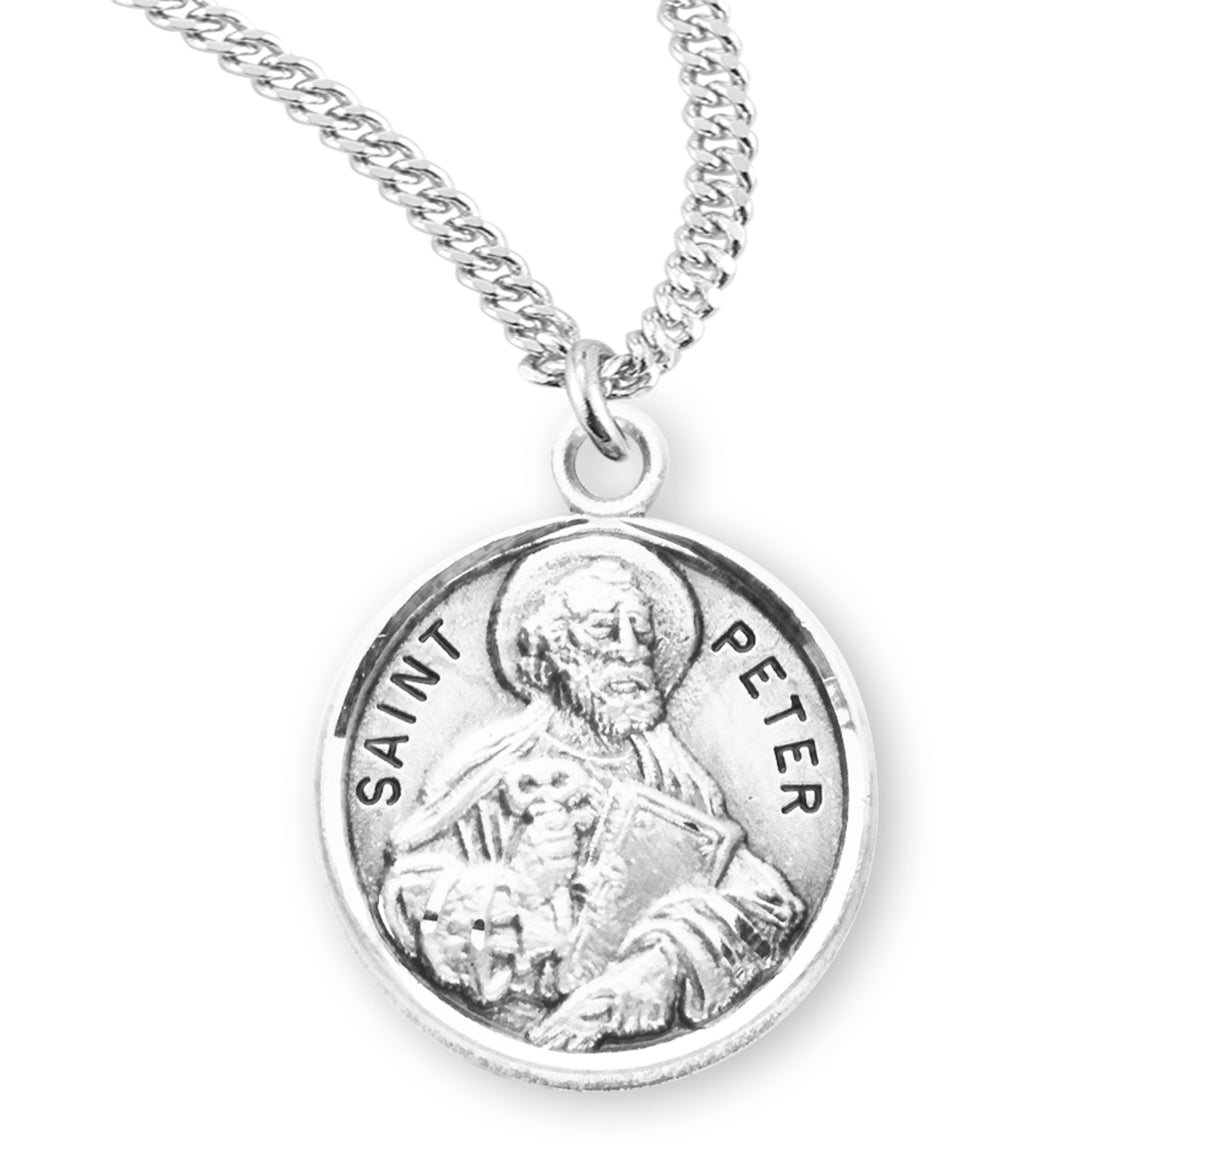 Patron Saint Peter Round Sterling Silver Medal